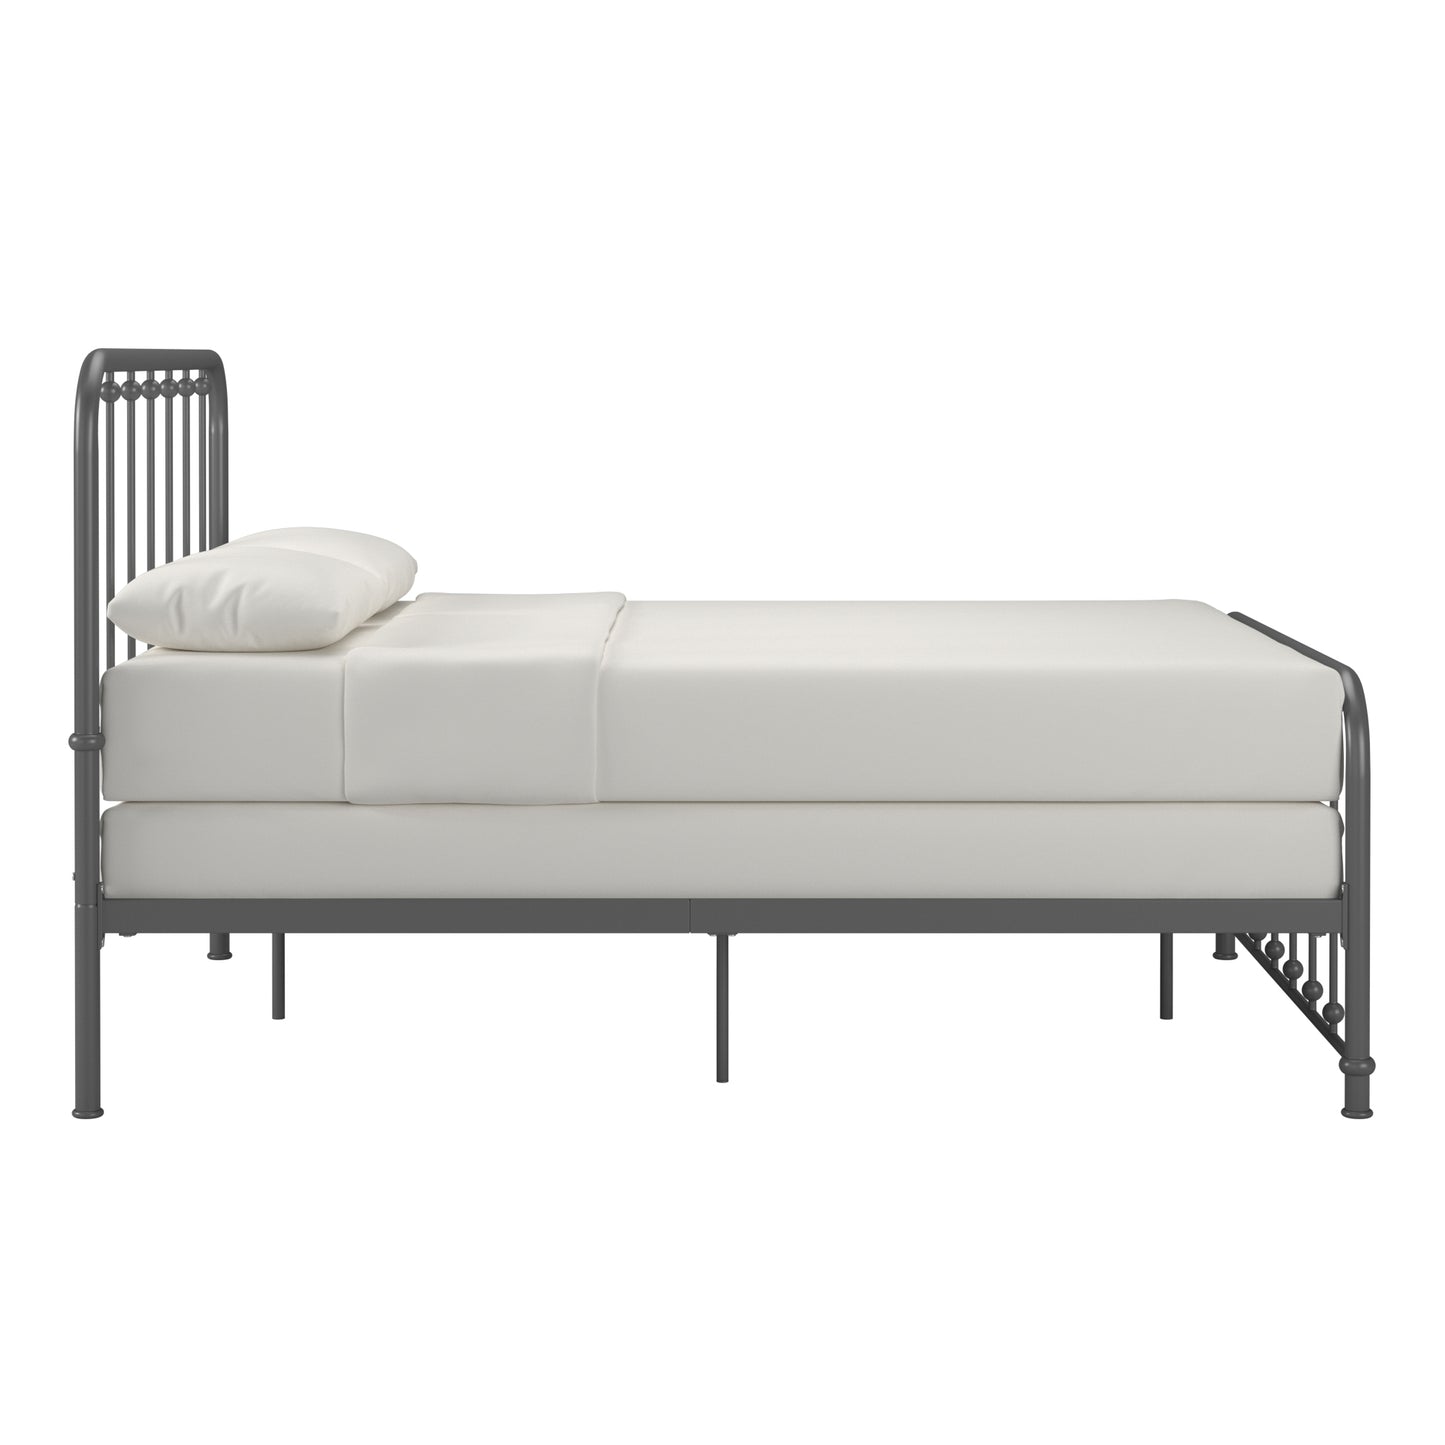 Beaded Spindle Metal Platform Bed - Frost Grey, Full Size (Full Size)